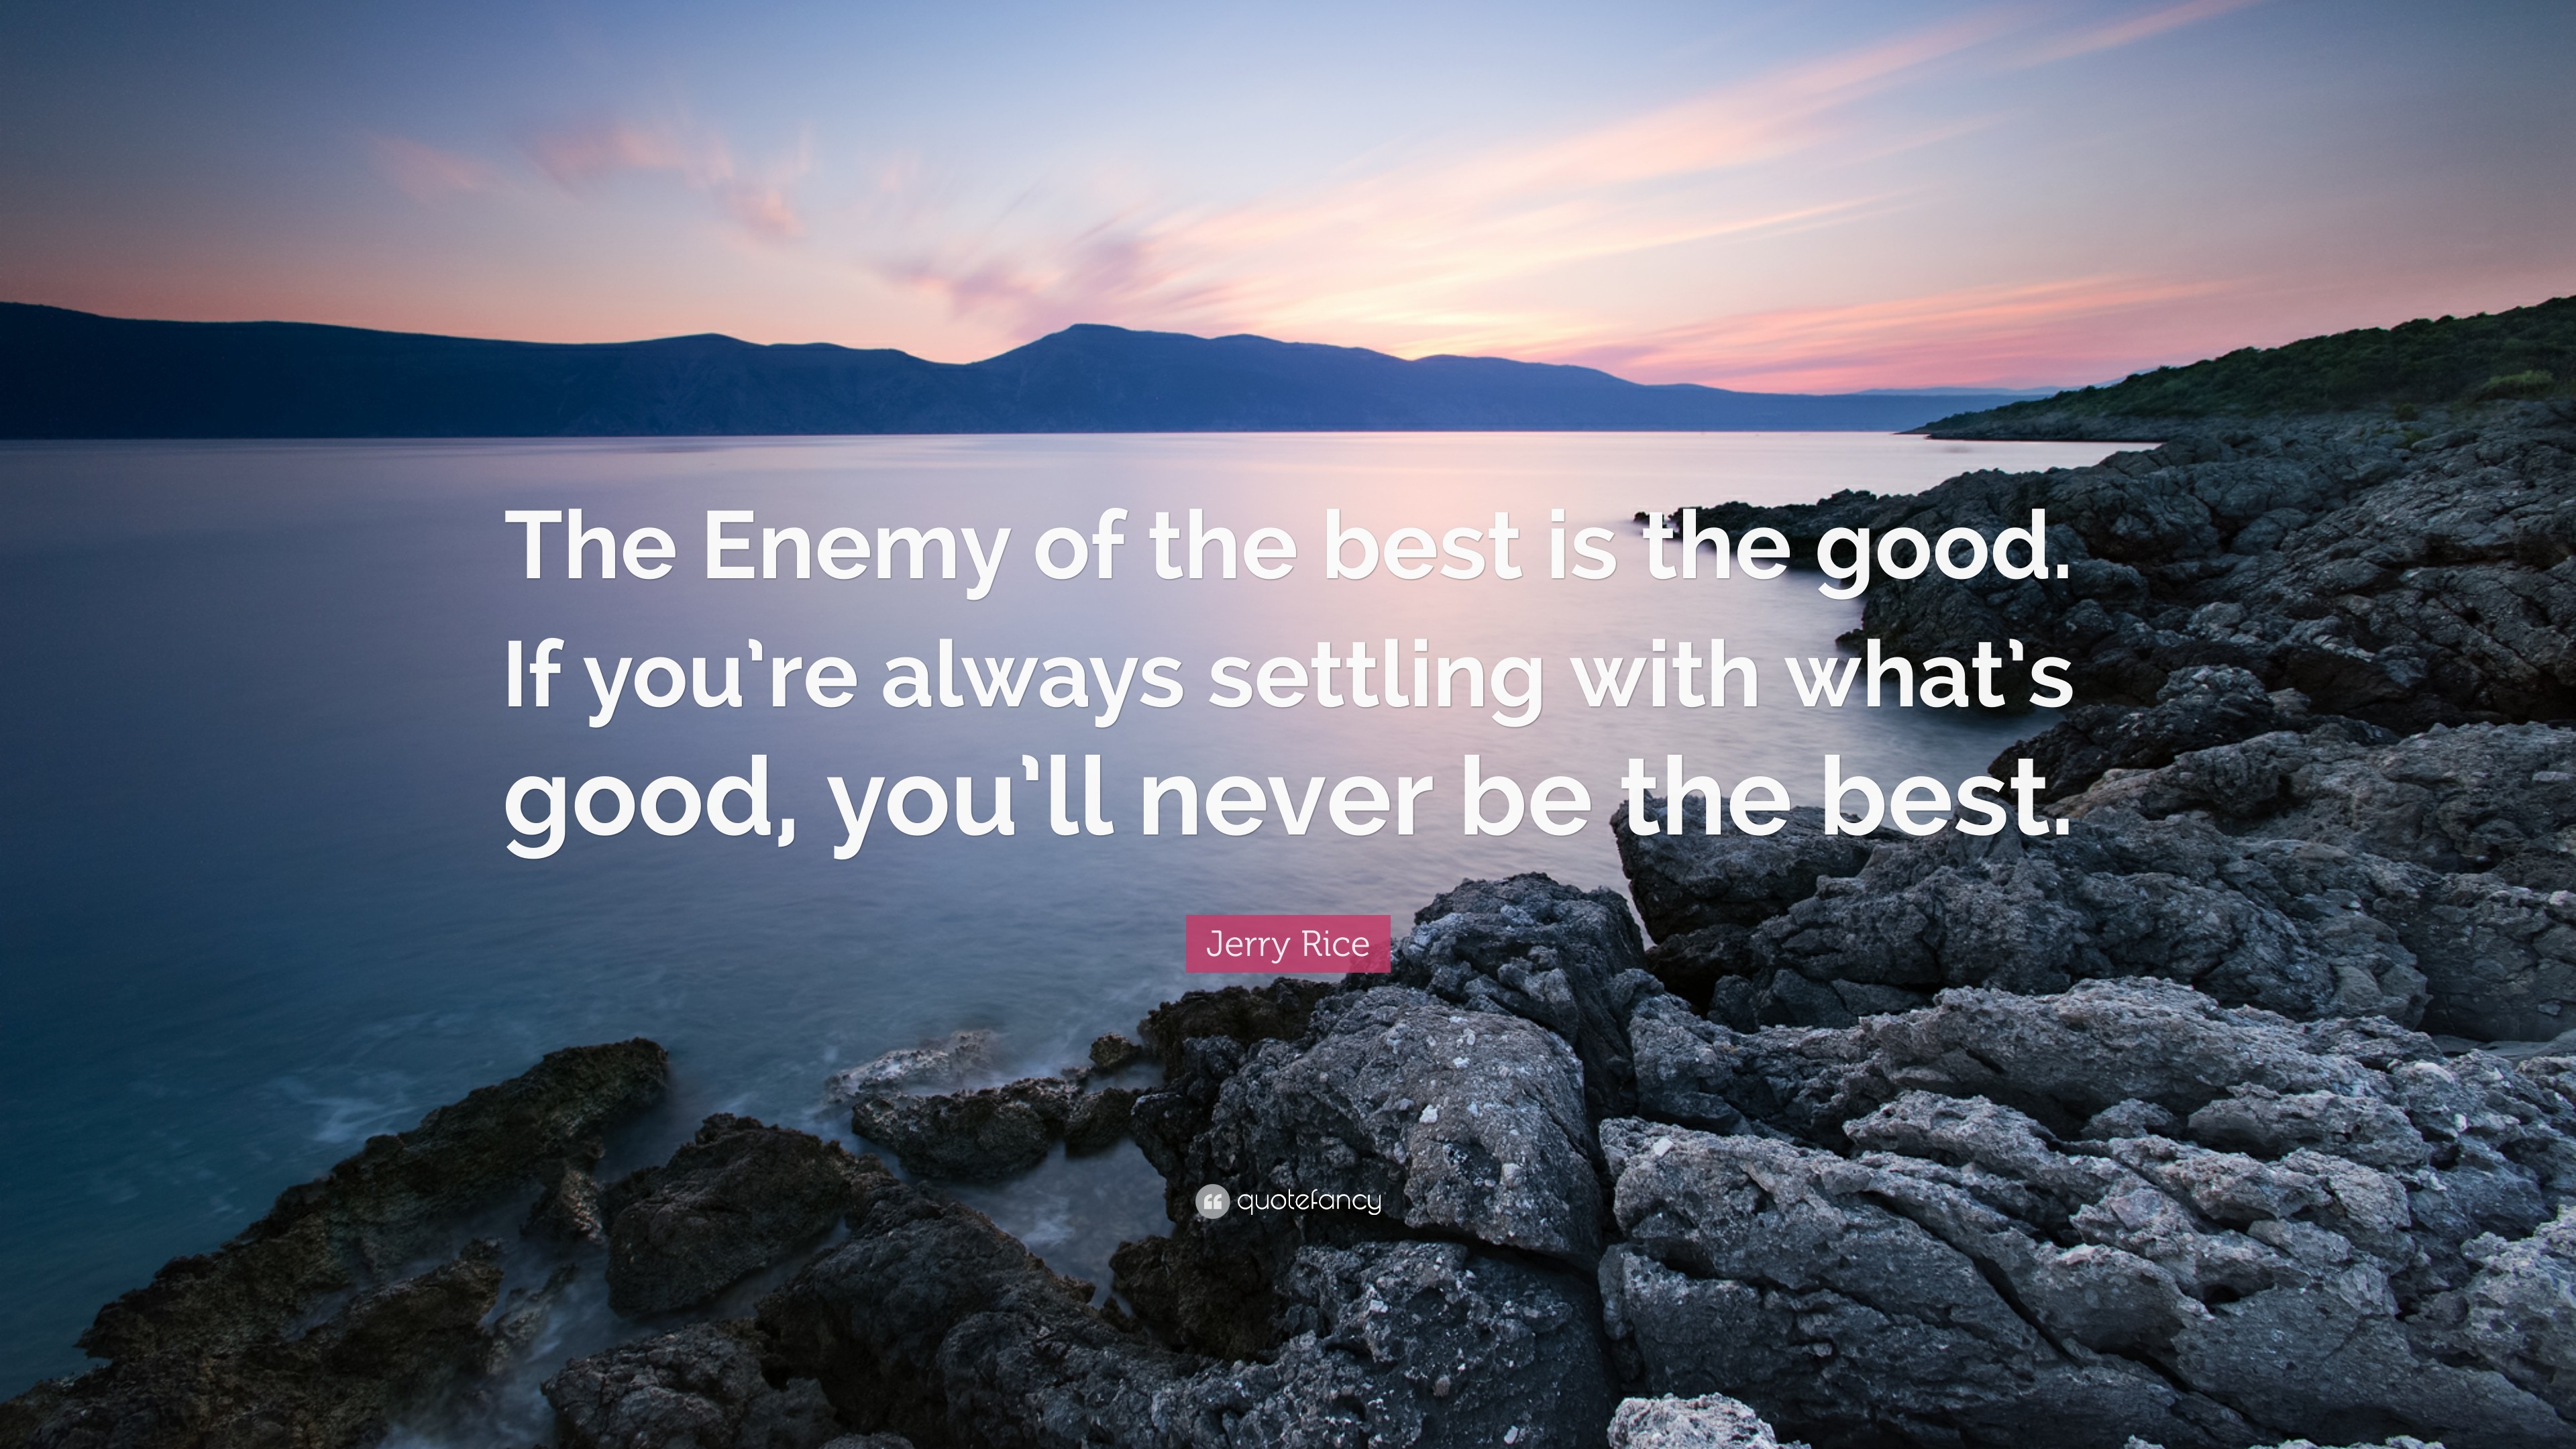 3840x2160 Jerry Rice Quote: “The Enemy of the best is the good. If you